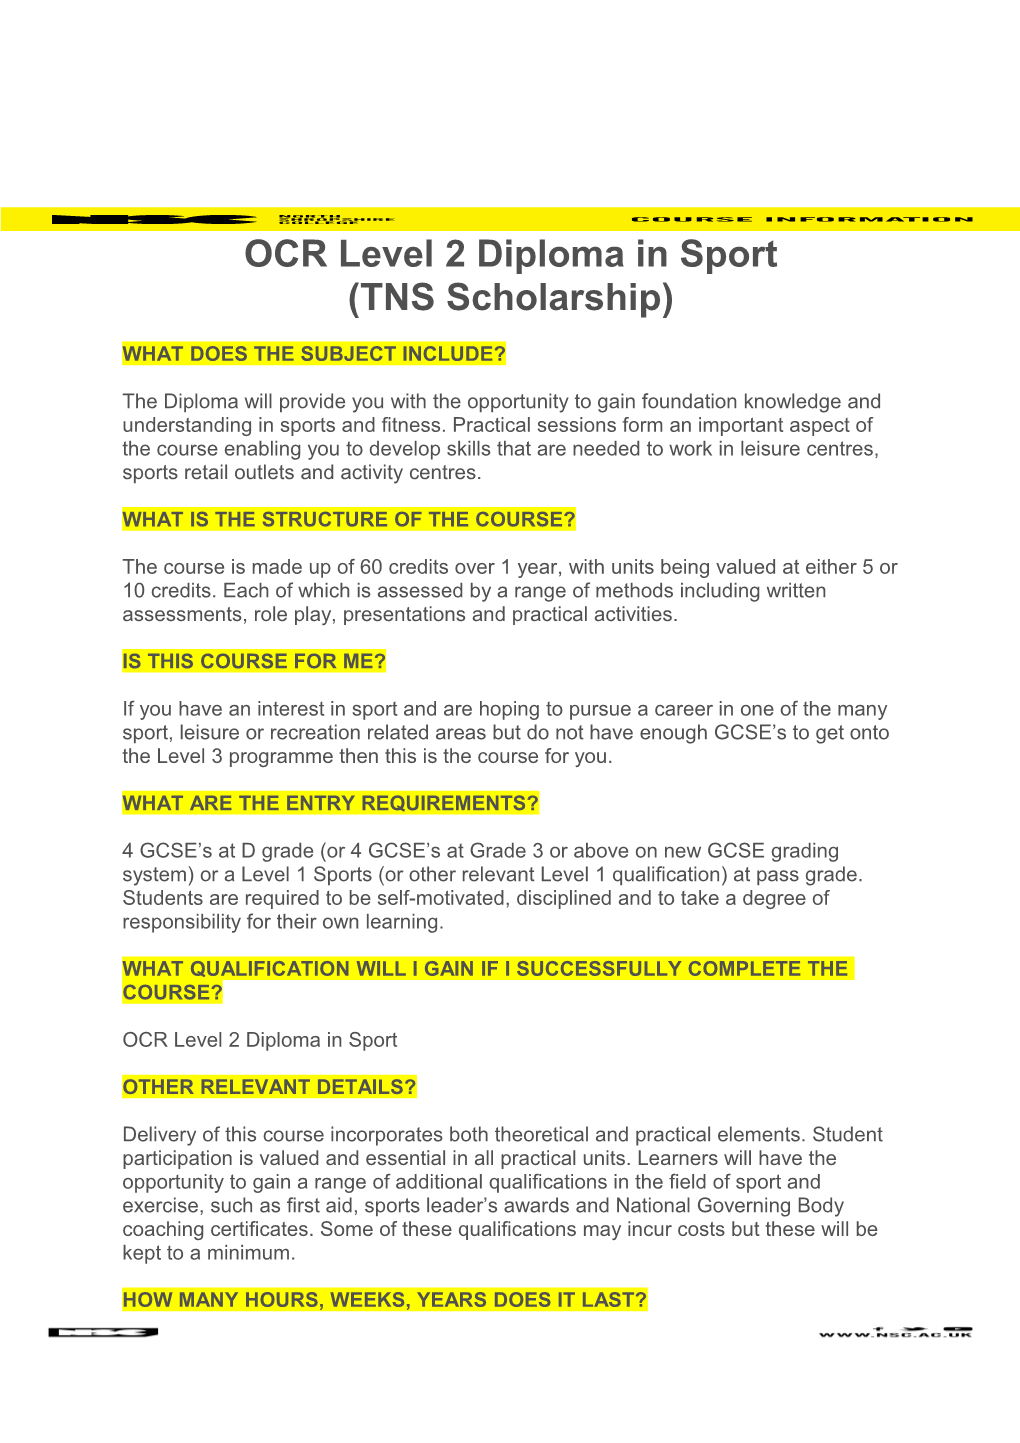 OCR Level 2 Diploma in Sport